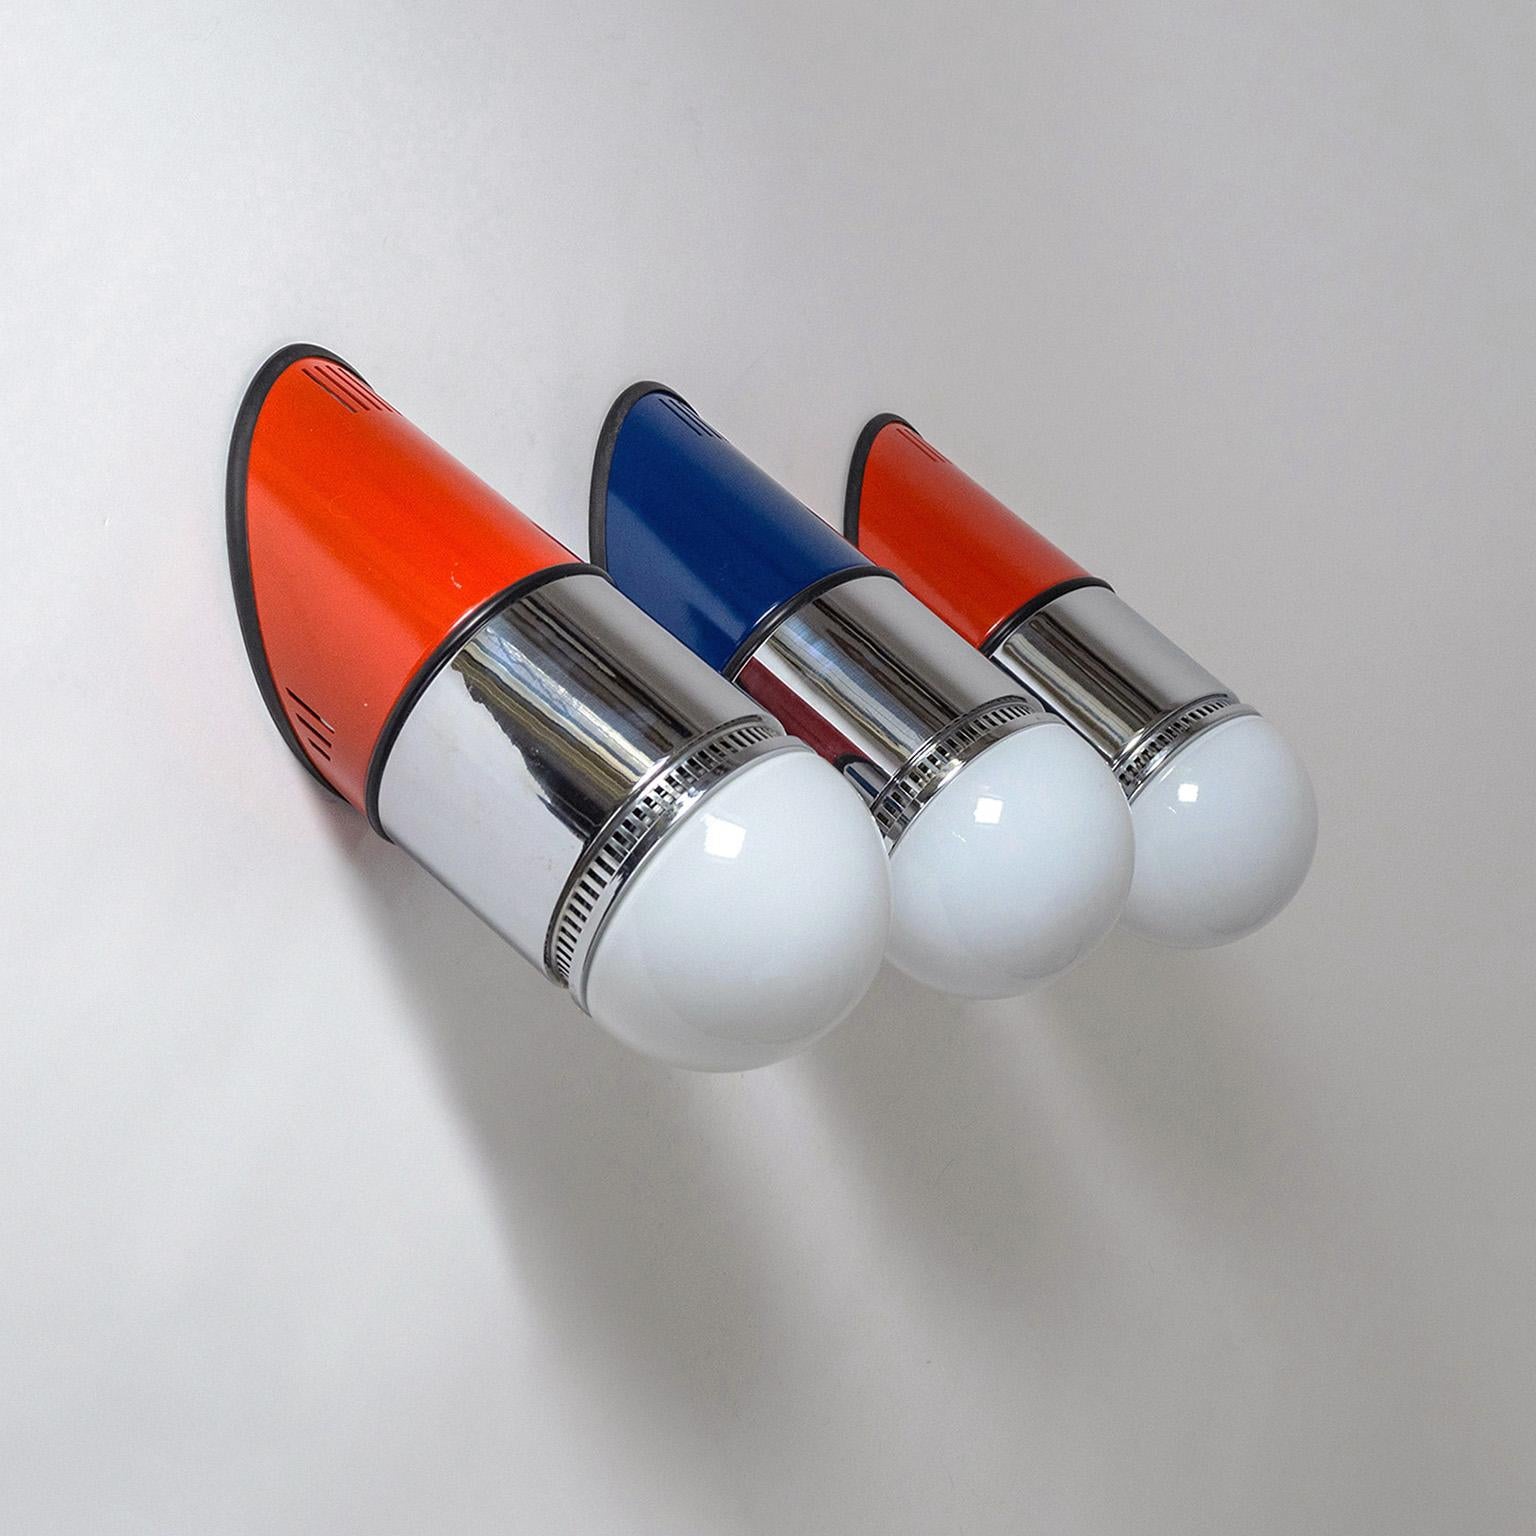 Set of three large Postmodern wall lights designed by Gianni Celada for Fontana Arte, 1980. Set at an angle of 45° these large wall lights (model ‚Sisten‘) are made of chromed and lacquered steel with opaline glass diffusers. Can be mounted pointing